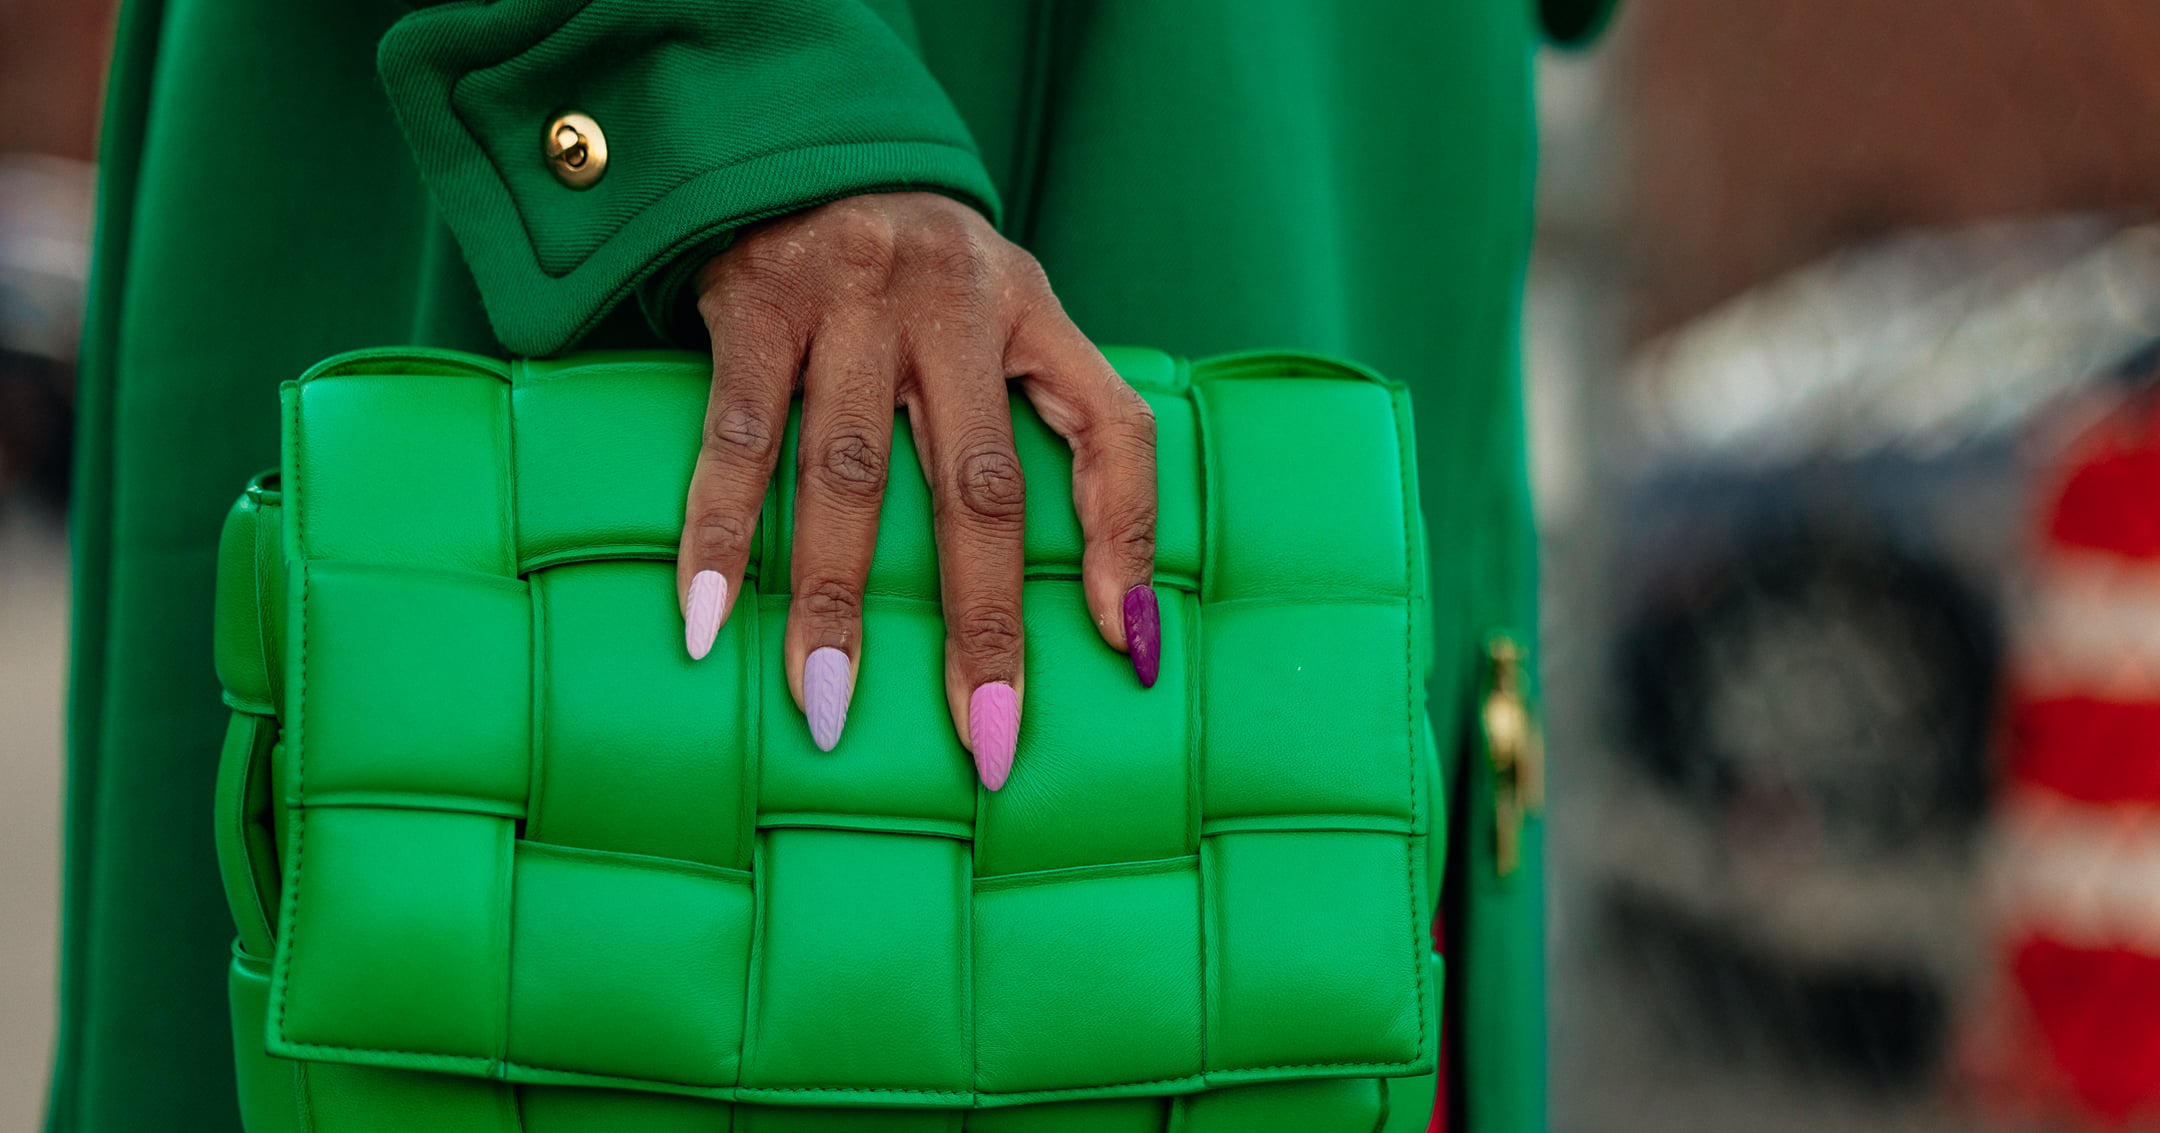 26 Matte Nail Ideas to Level Up Your Manicure